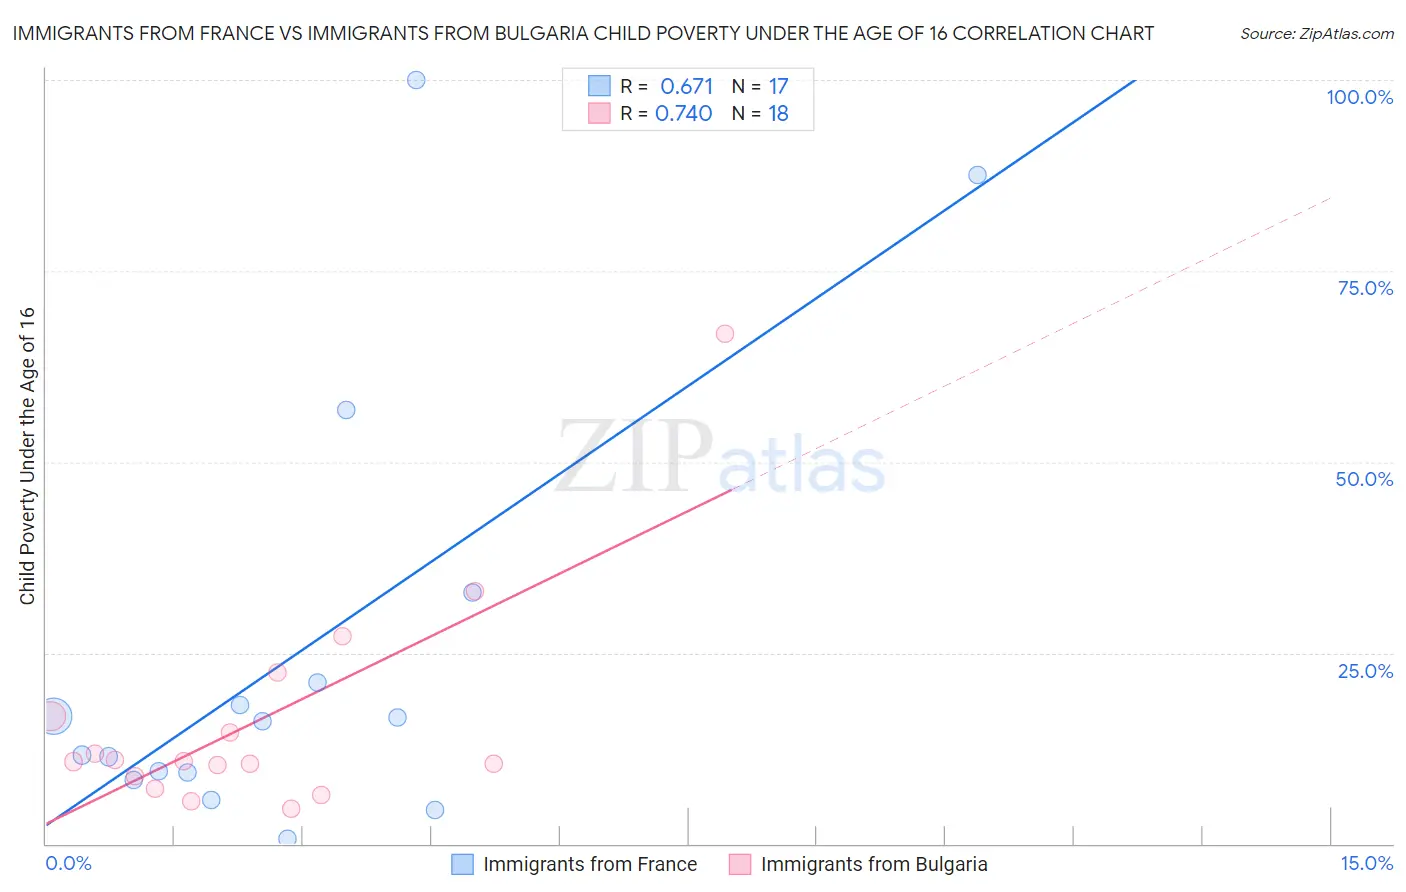 Immigrants from France vs Immigrants from Bulgaria Child Poverty Under the Age of 16